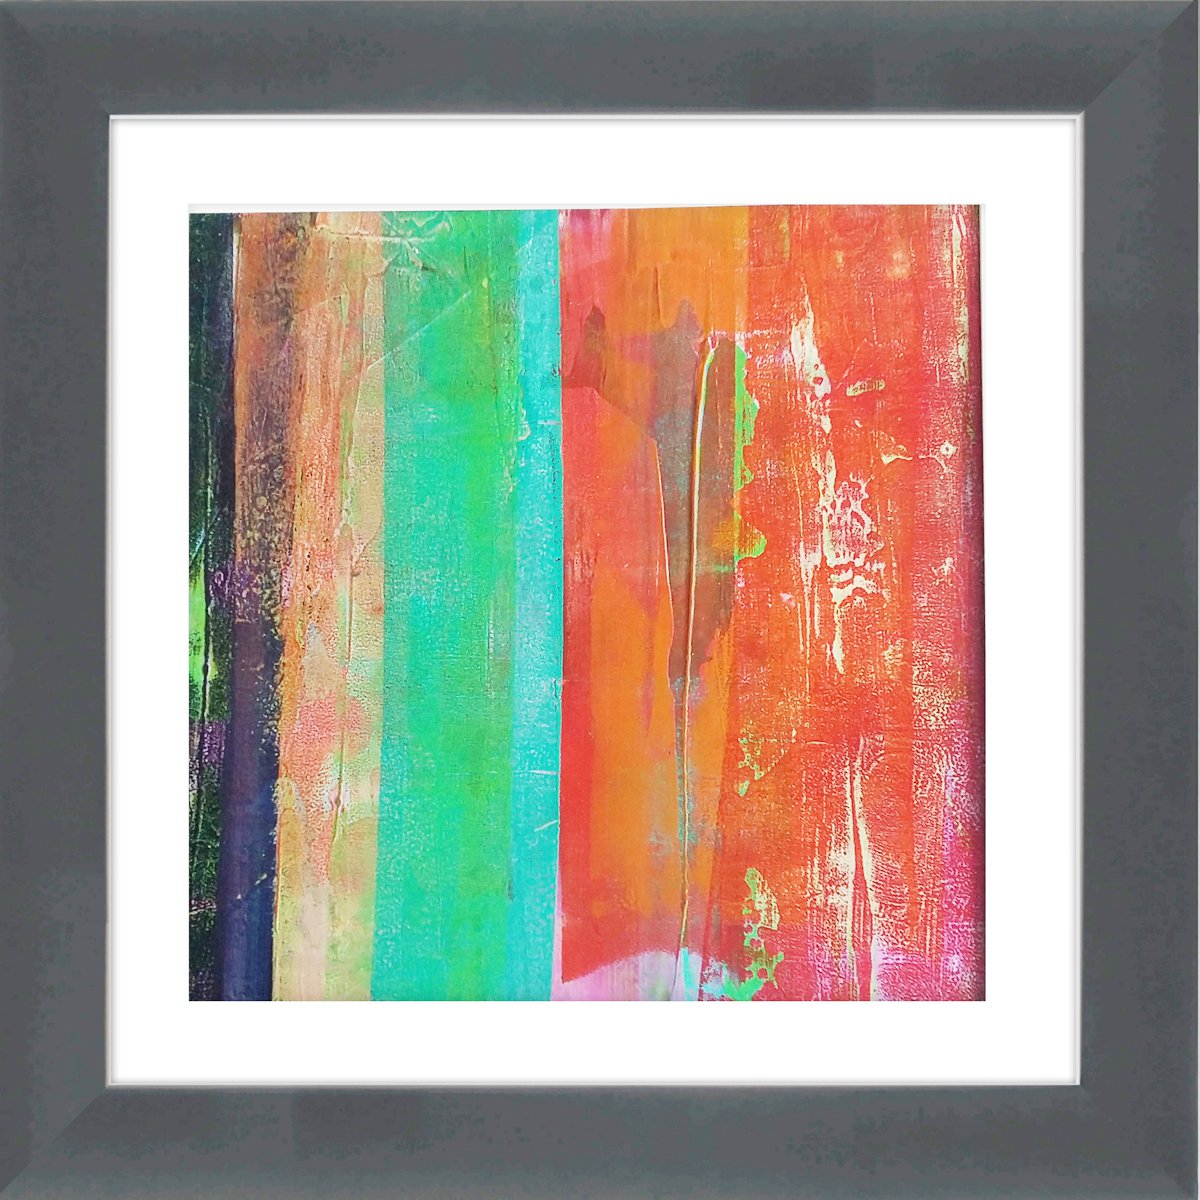 Abstraction #22 - Framed and ready to hang - original abstract painting by Carolynne Coulson